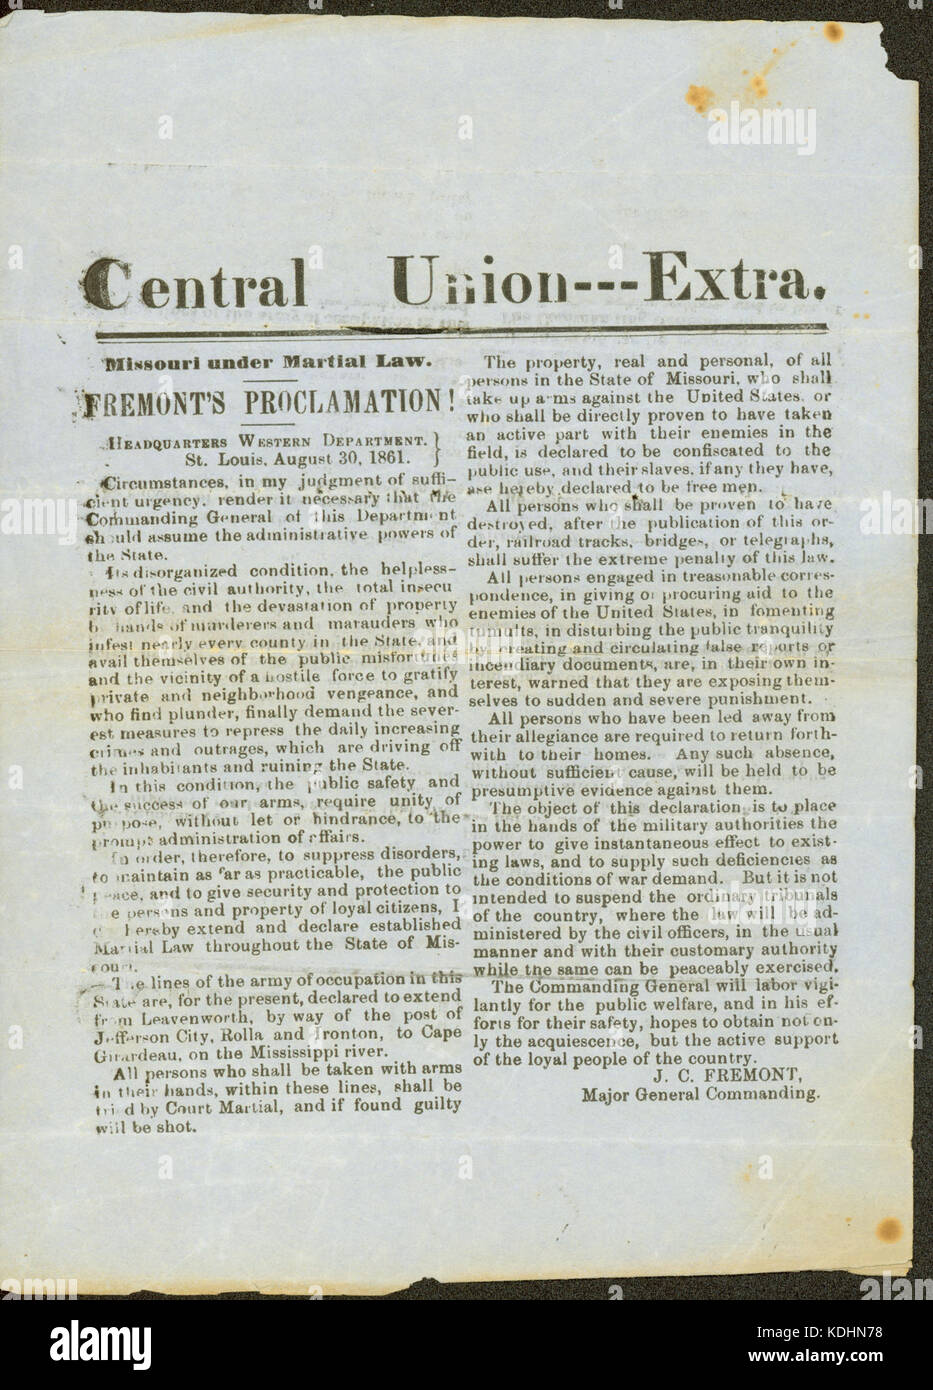 Newspaper issue of theCentral Union Extra, August 30, 1861 Stock Photo